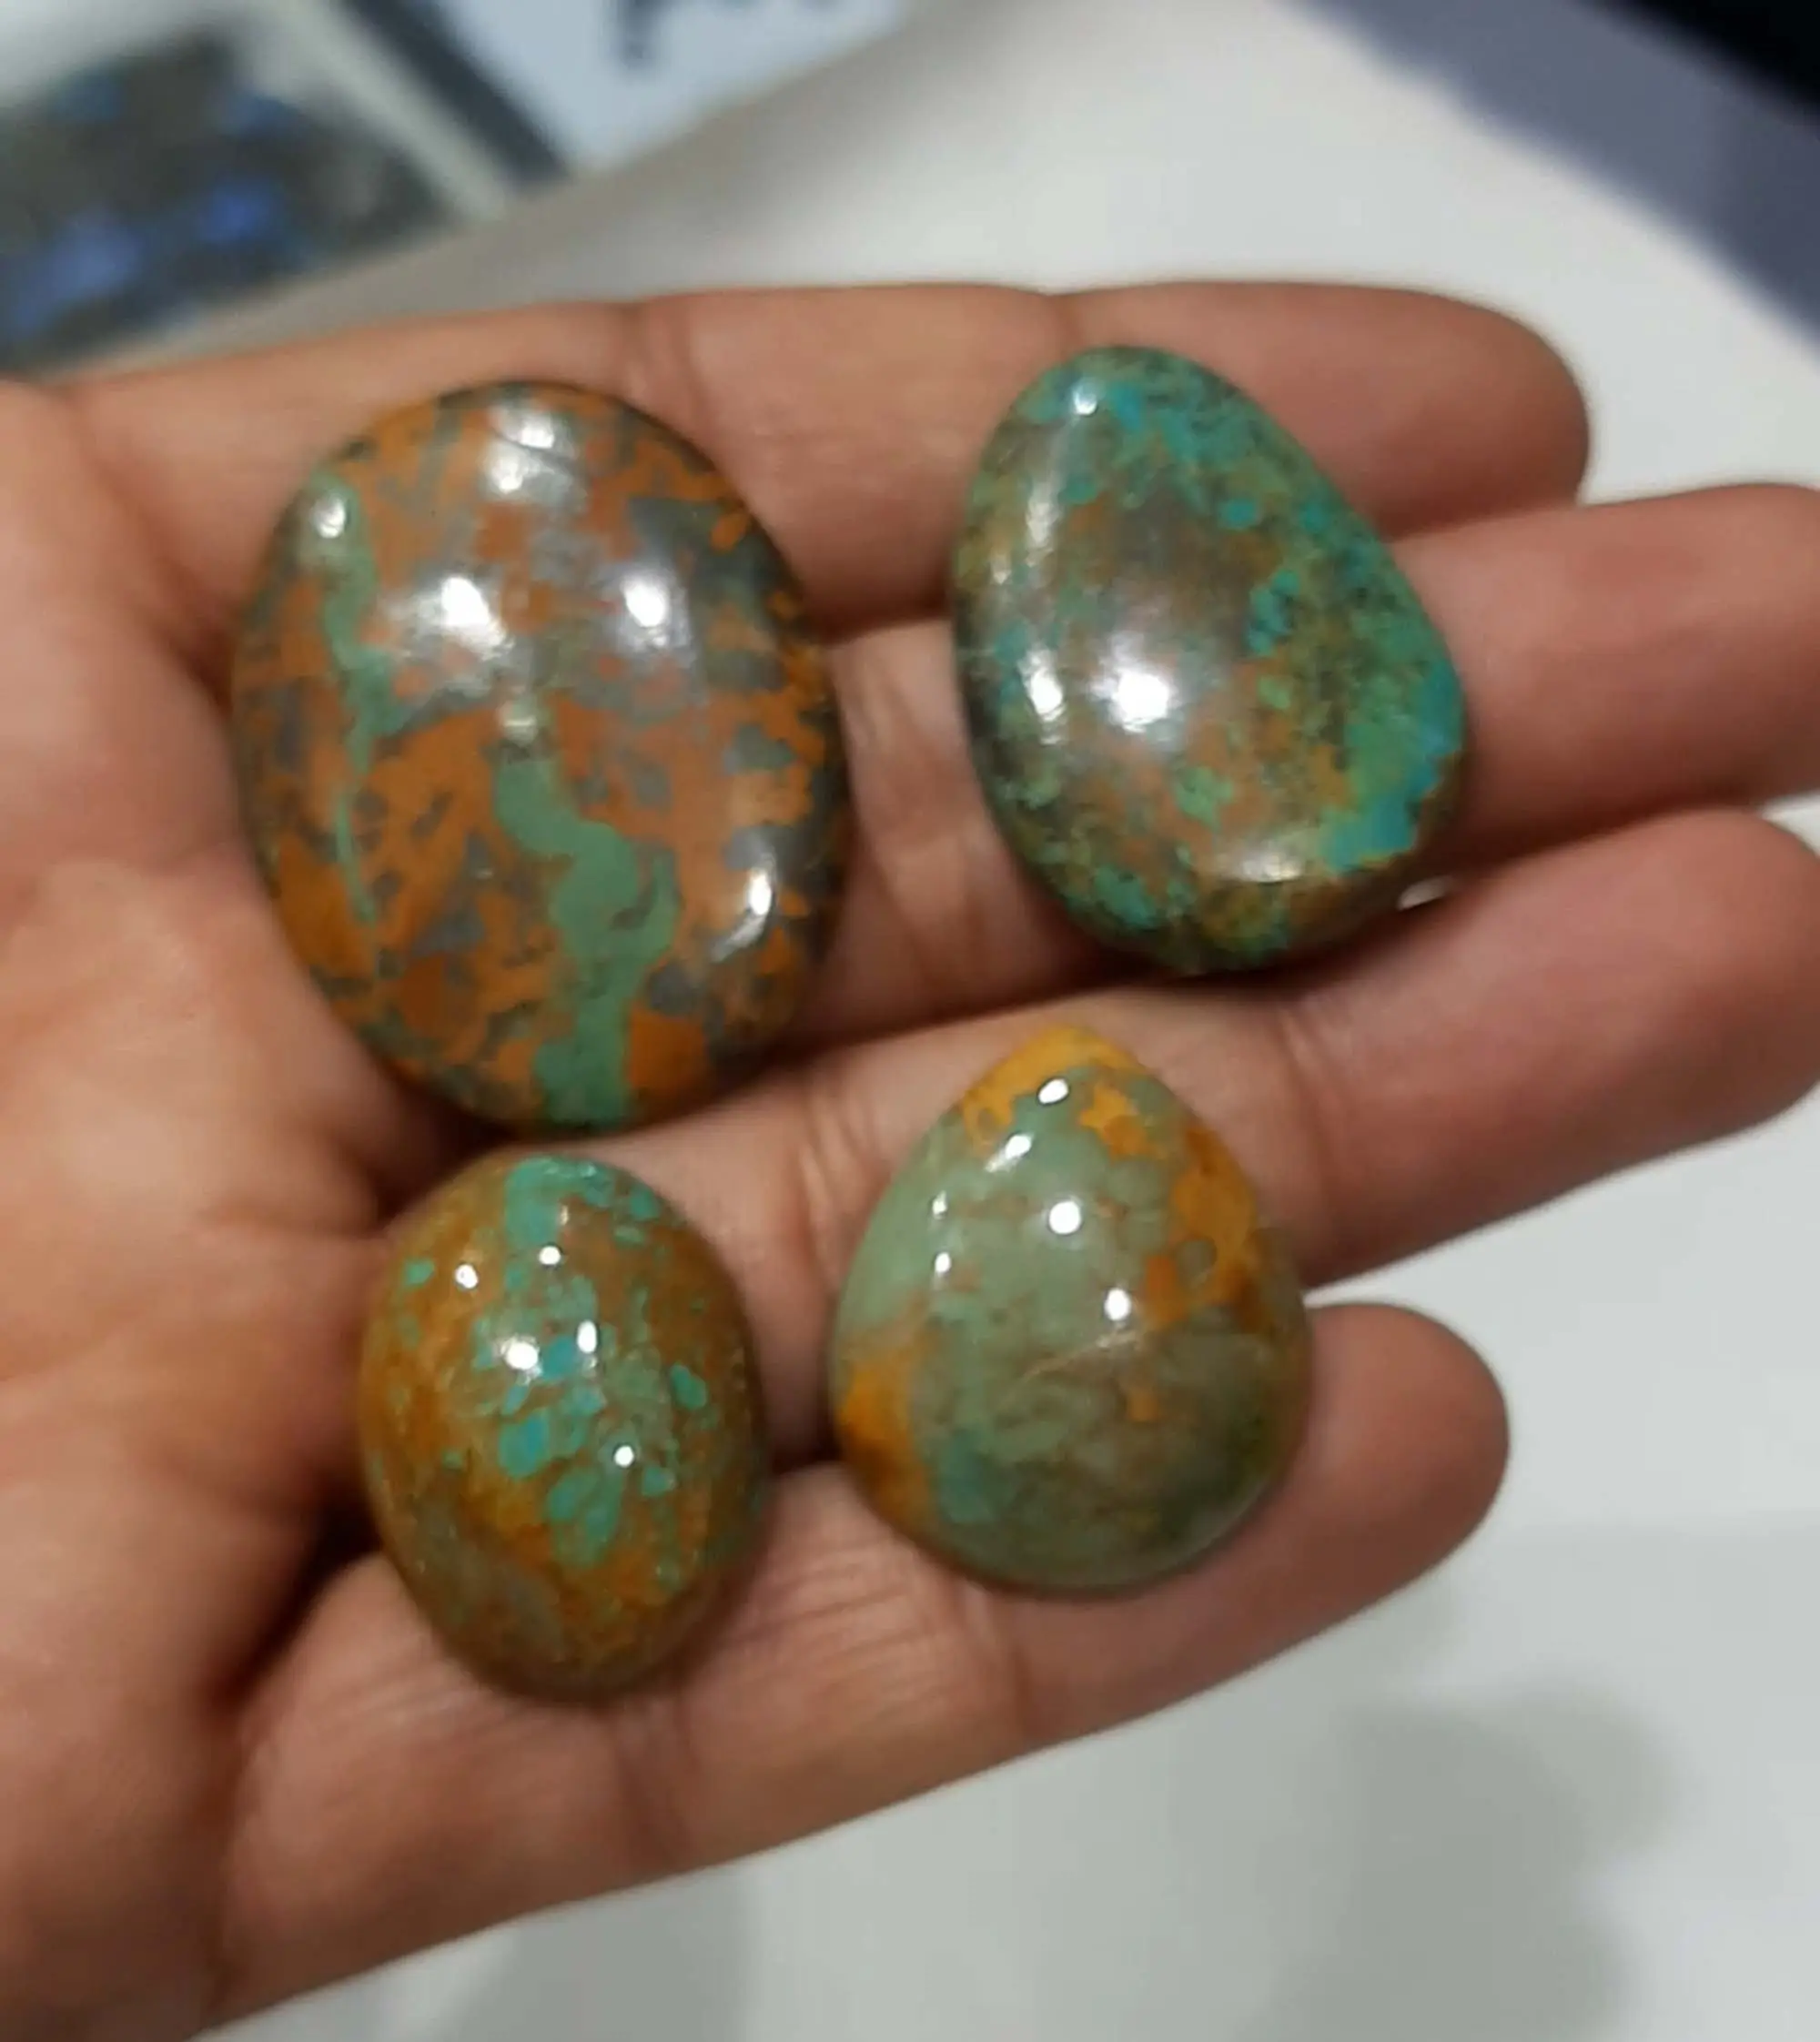 Natural Mohave Copper Turquoise Stones New Looking Turquoise Loos Cabochon Gemstone Wholesale Suppliers